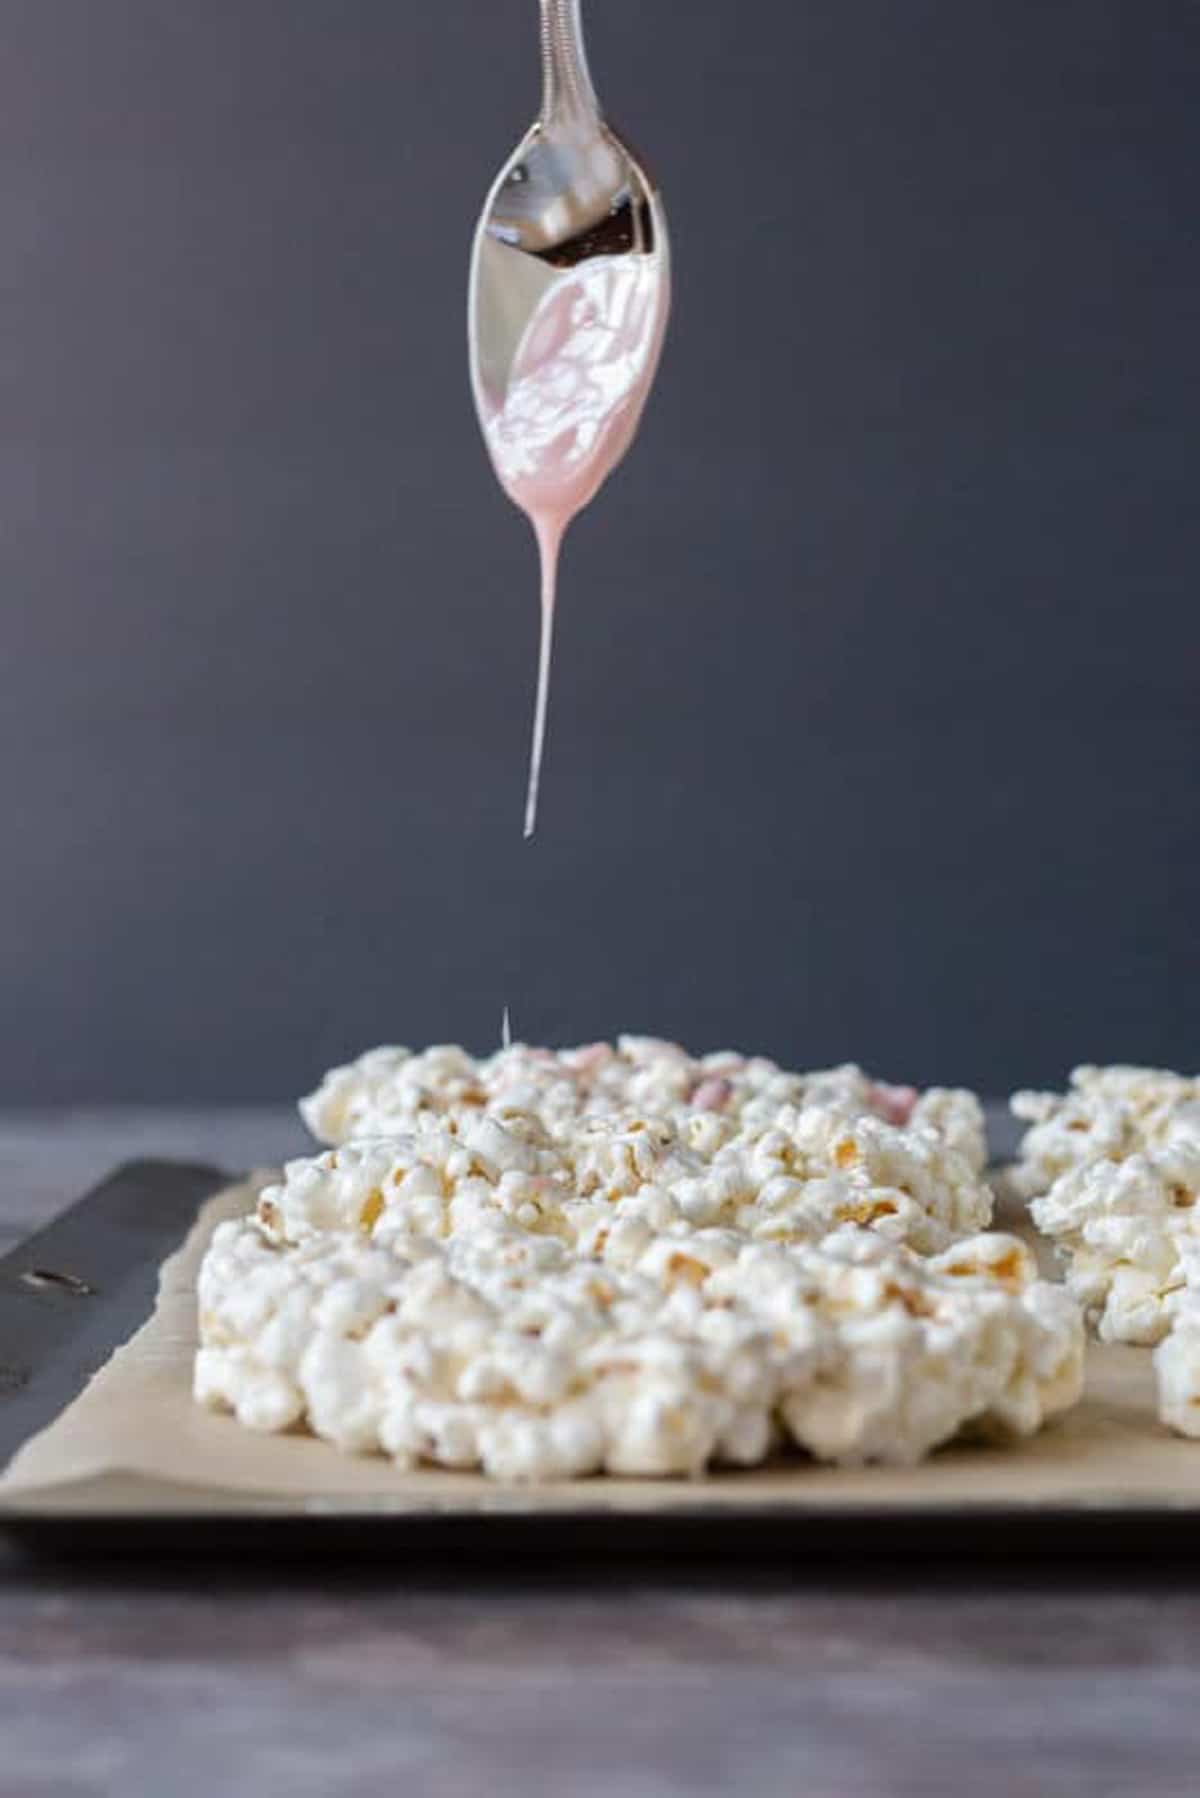 Pink colored white chocolate dripping off a silver spoon onto marshmallow popcorn hearts.